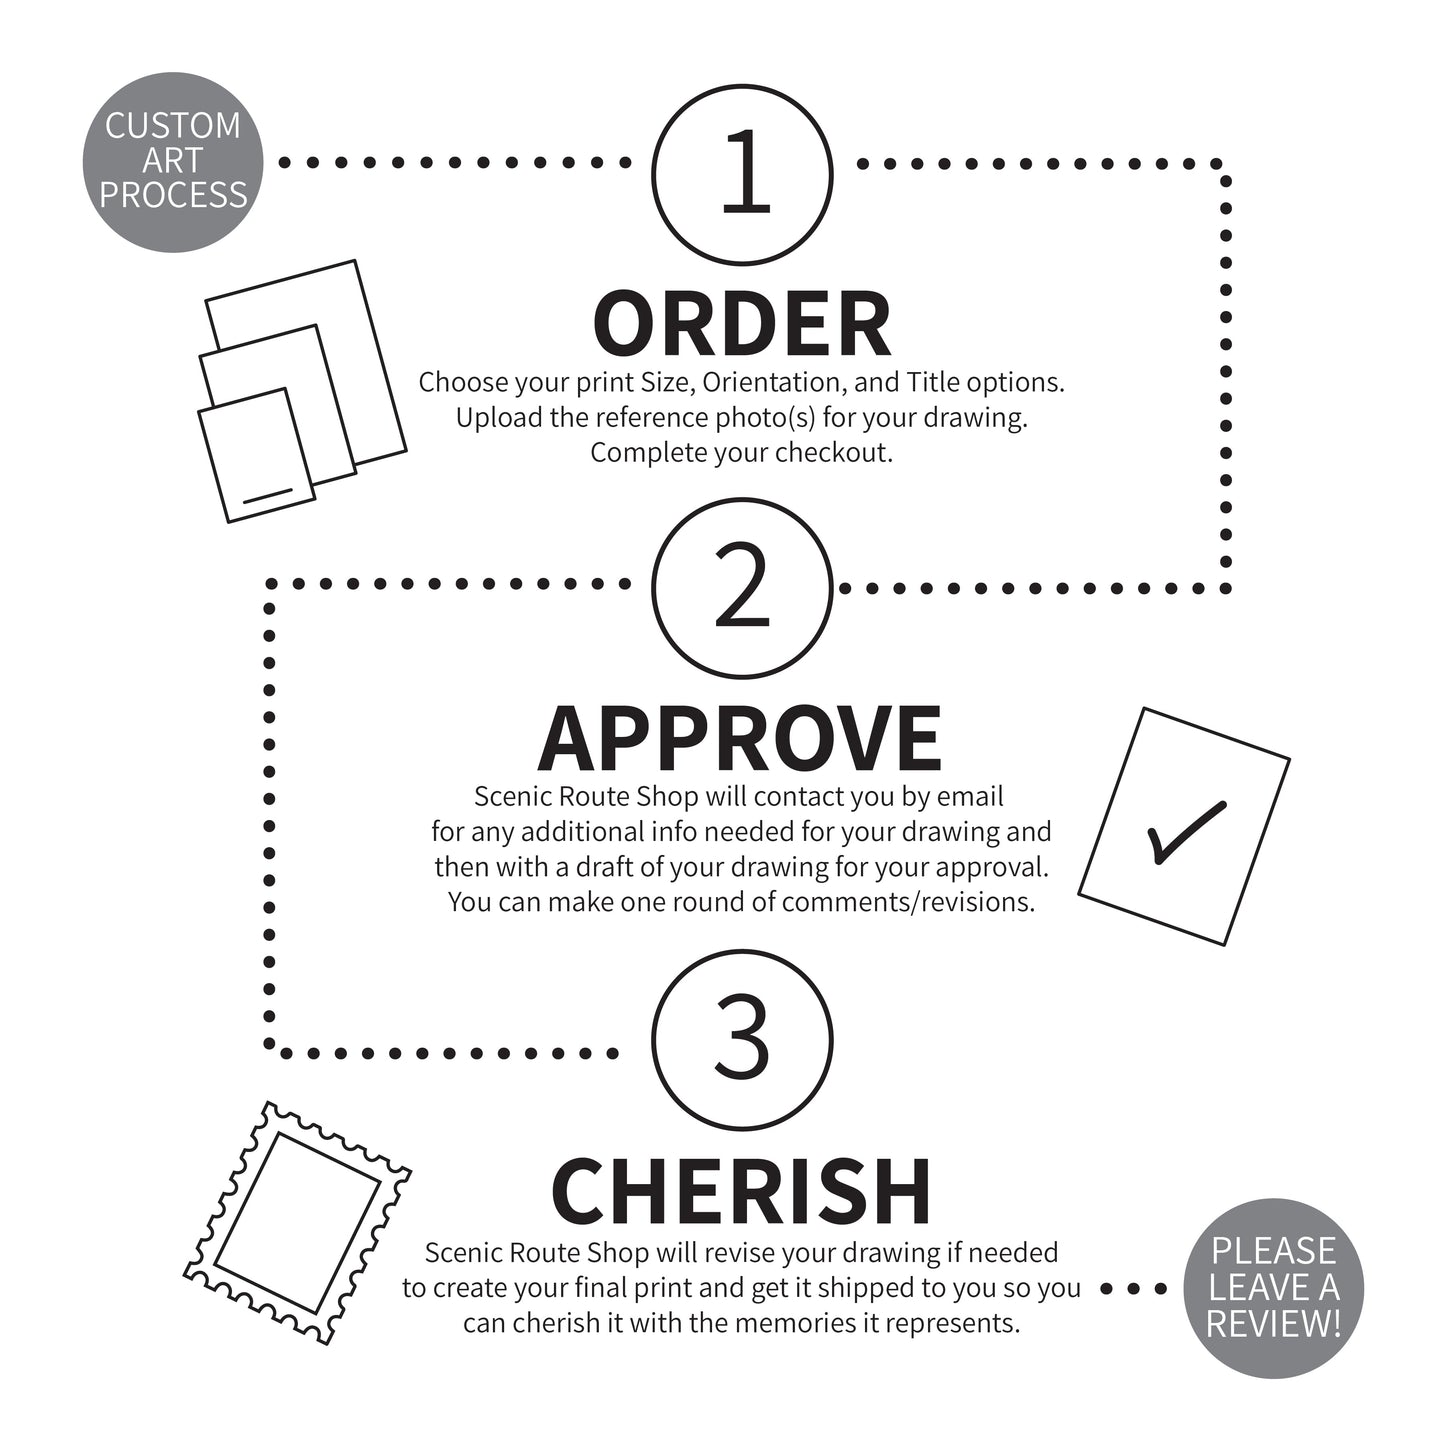 A diagram of the custom order process for the Scenic Route Shop